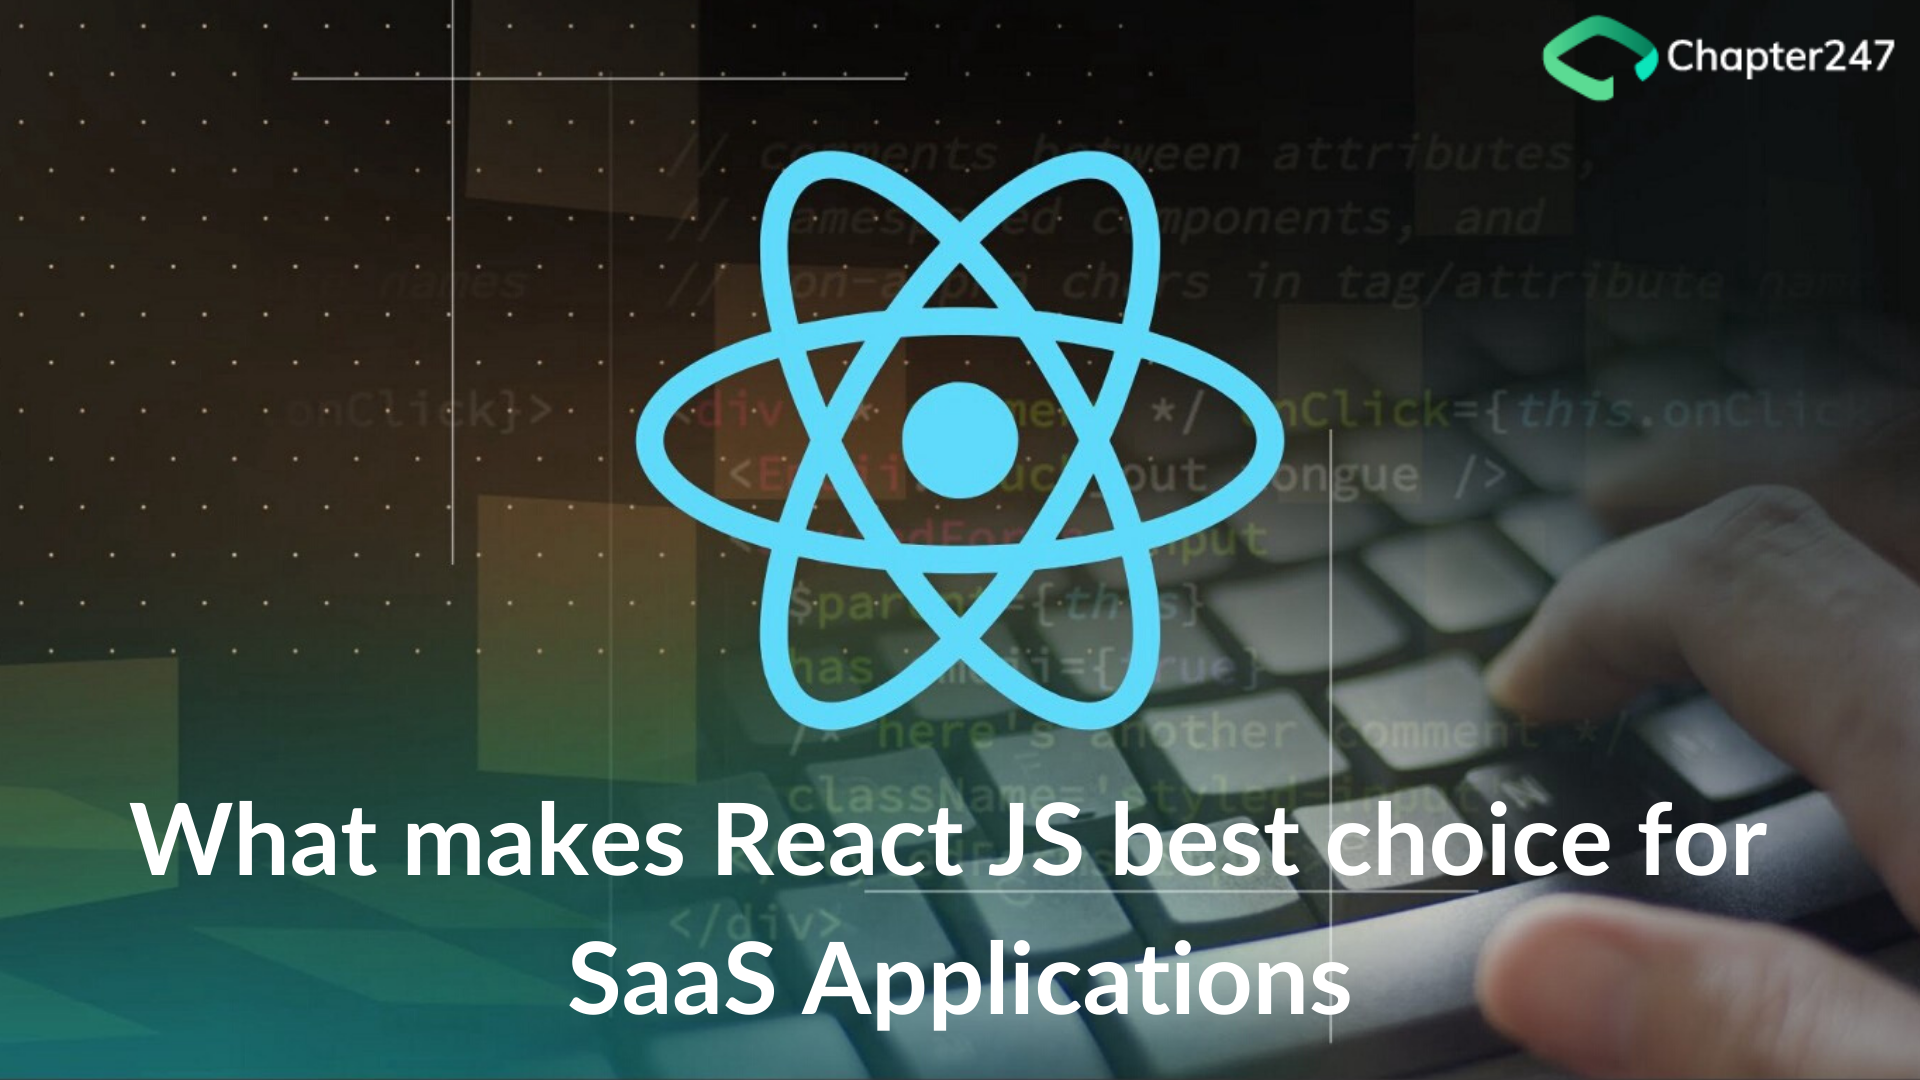 What makes React JS best choice for SaaS Applications